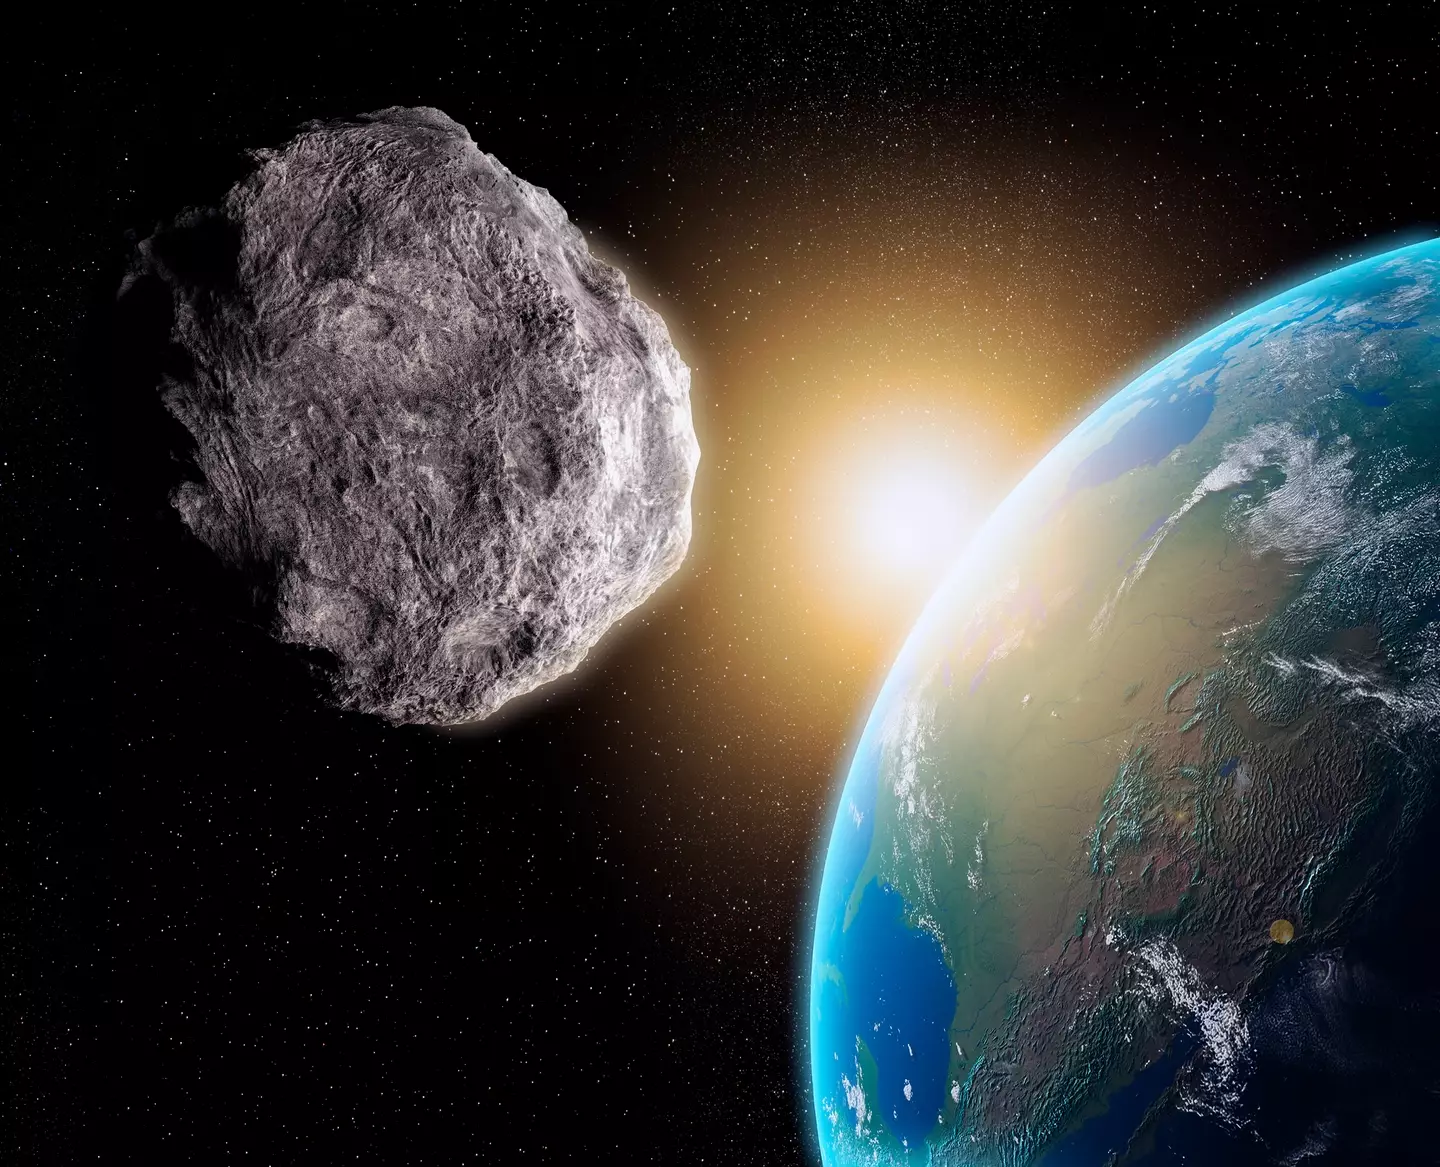 Earth is due to experience a close encounter with the asteroid in 2029 (ANDRZEJ WOJCICKI/Getty)